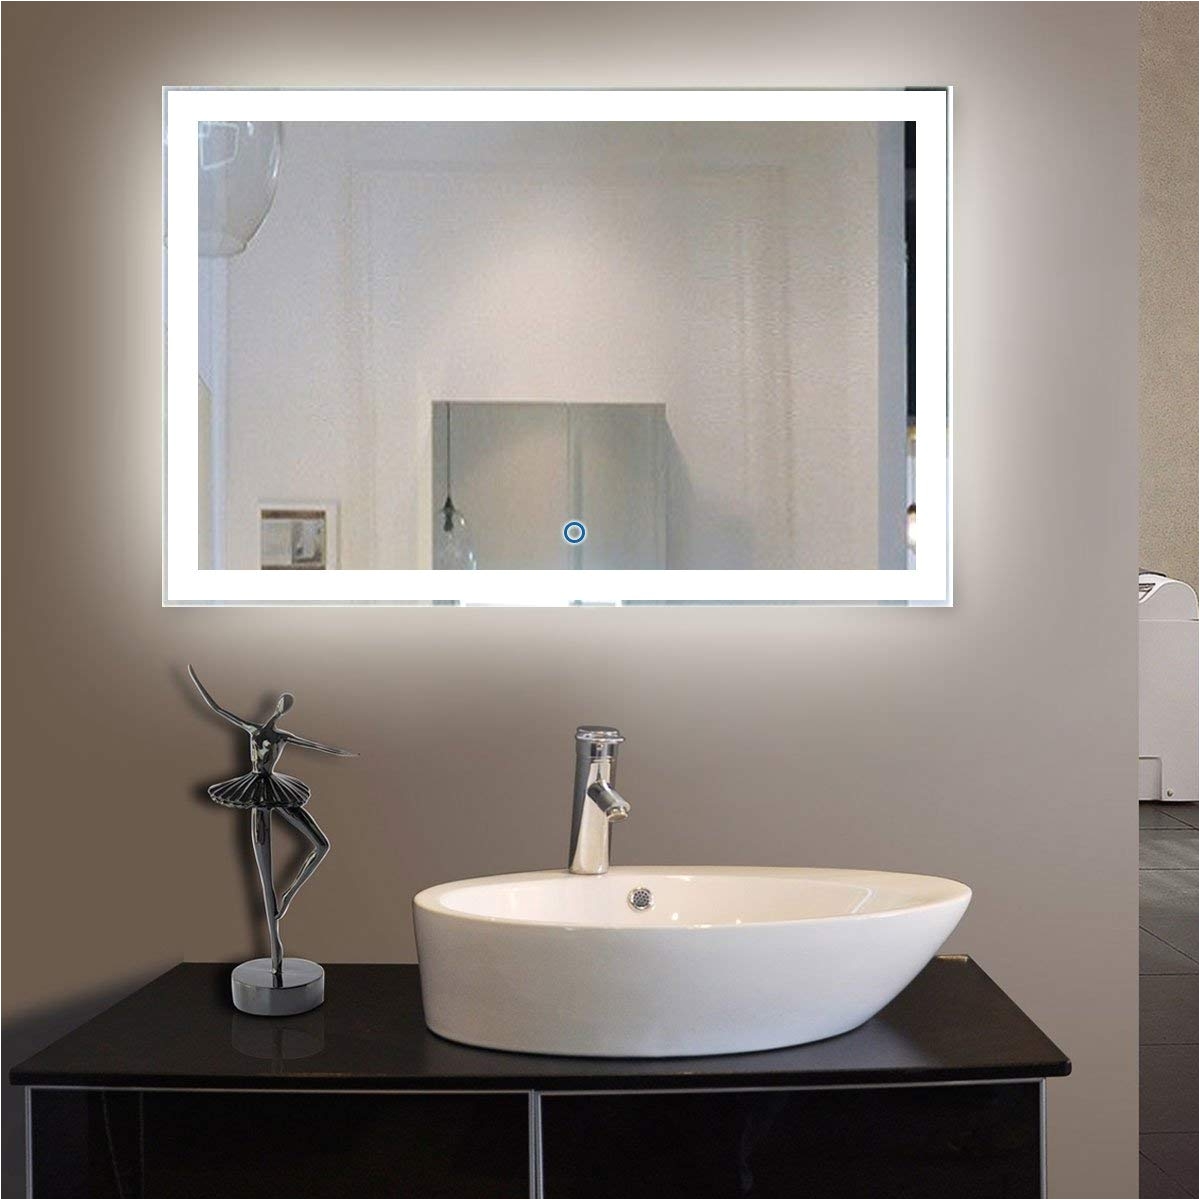 amazon com 2432 in rectangle vertical led decorative bathroom silvered mirror touch button d n031 home kitchen